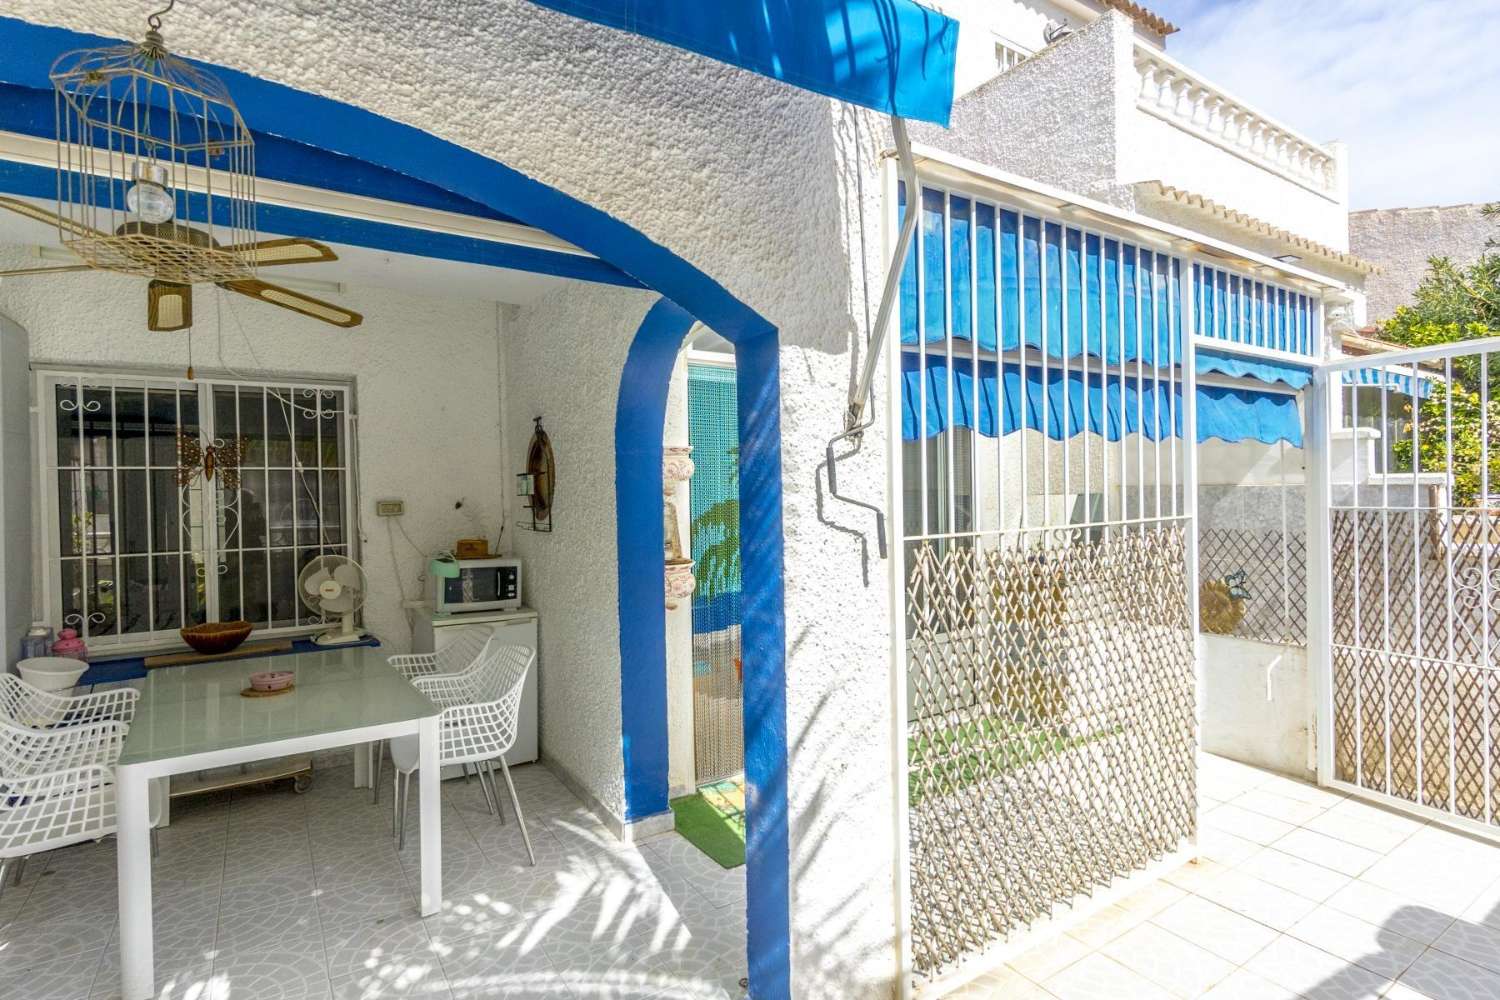 TORREVIEJA El Limonar, Charming 2 bedroom semi-detached house, renovated, with shared swimming pool